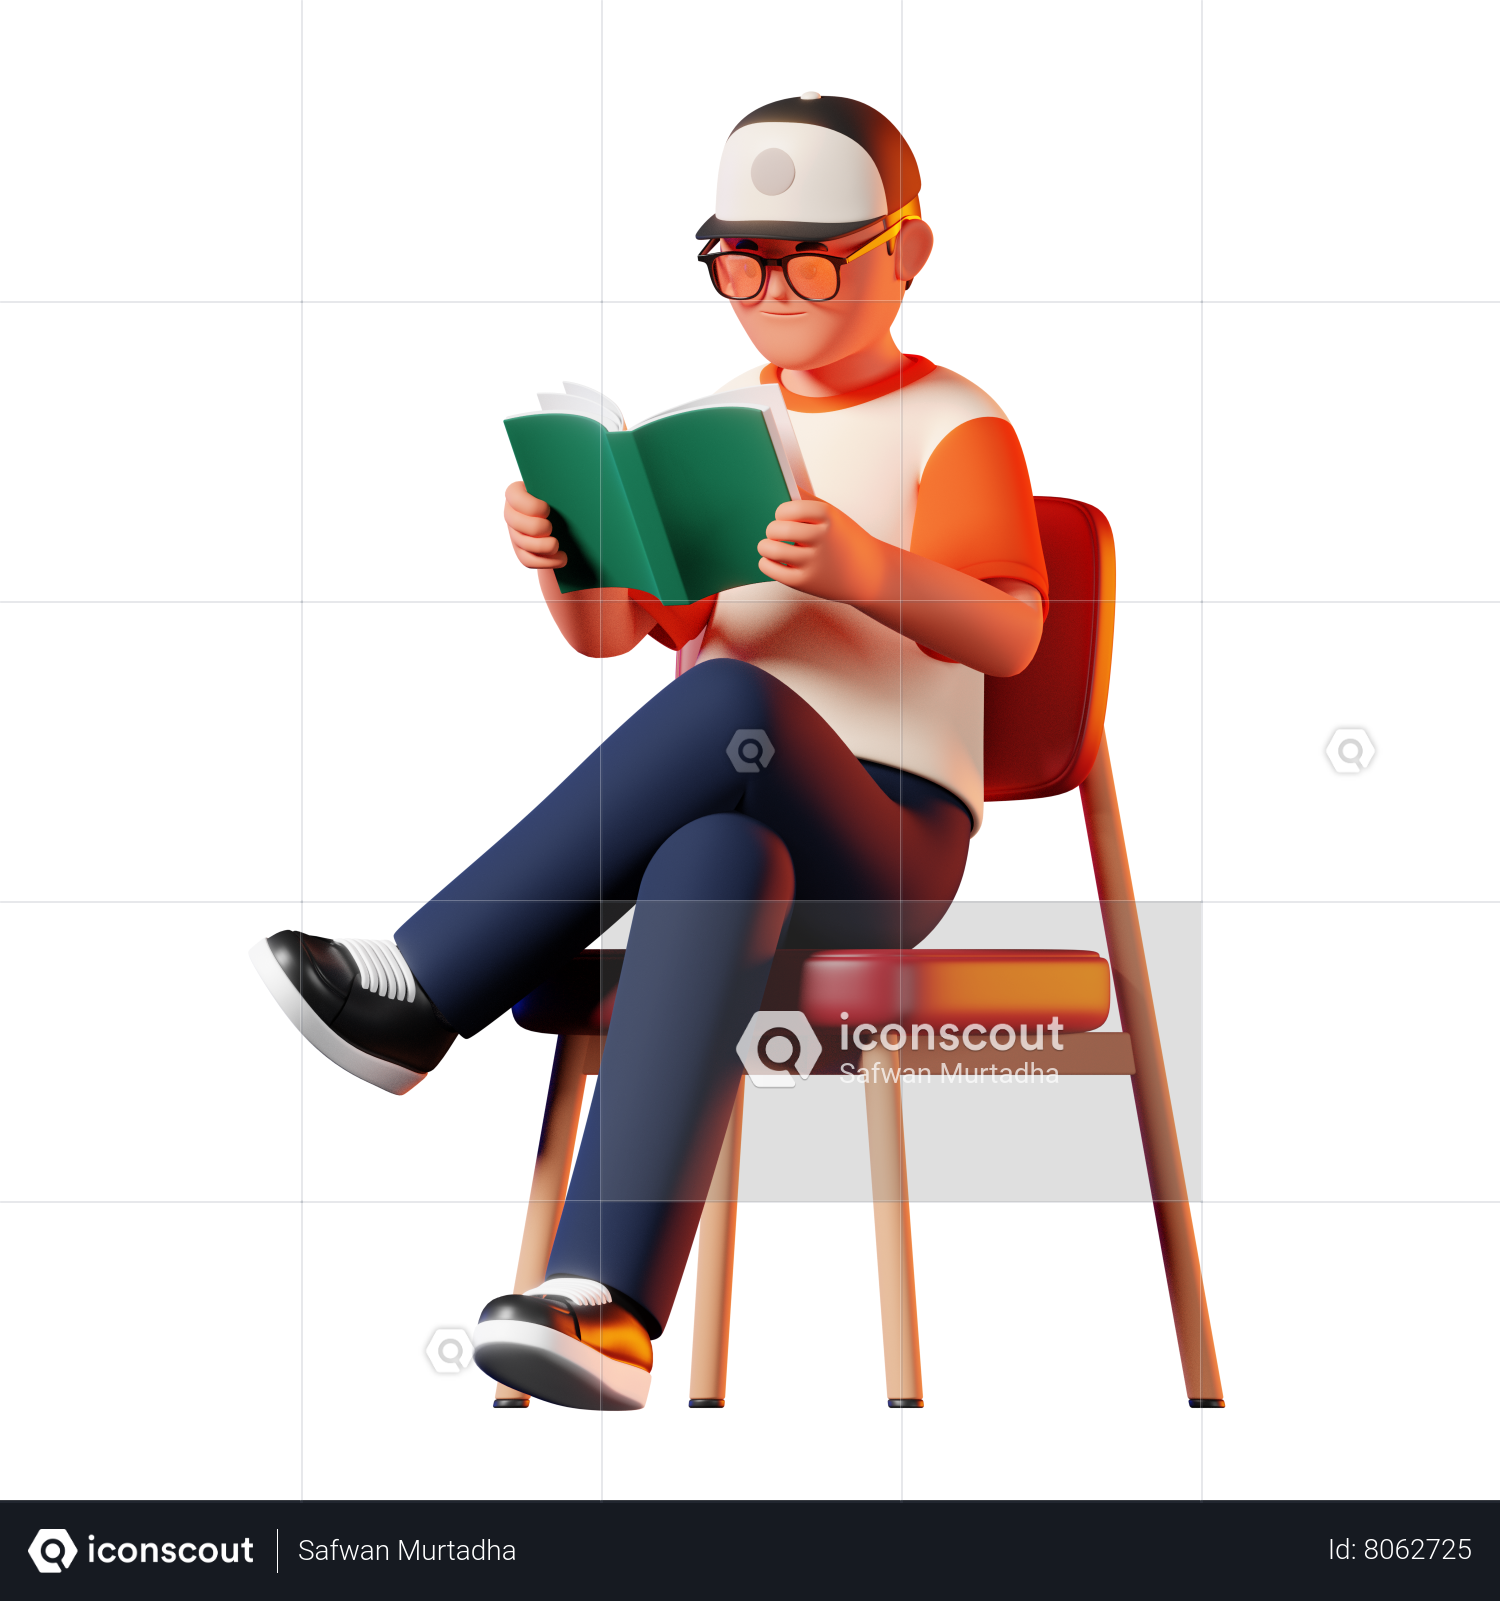 Student Sitting With Laptop: Over 30,032 Royalty-Free Licensable Stock  Illustrations & Drawings | Shutterstock